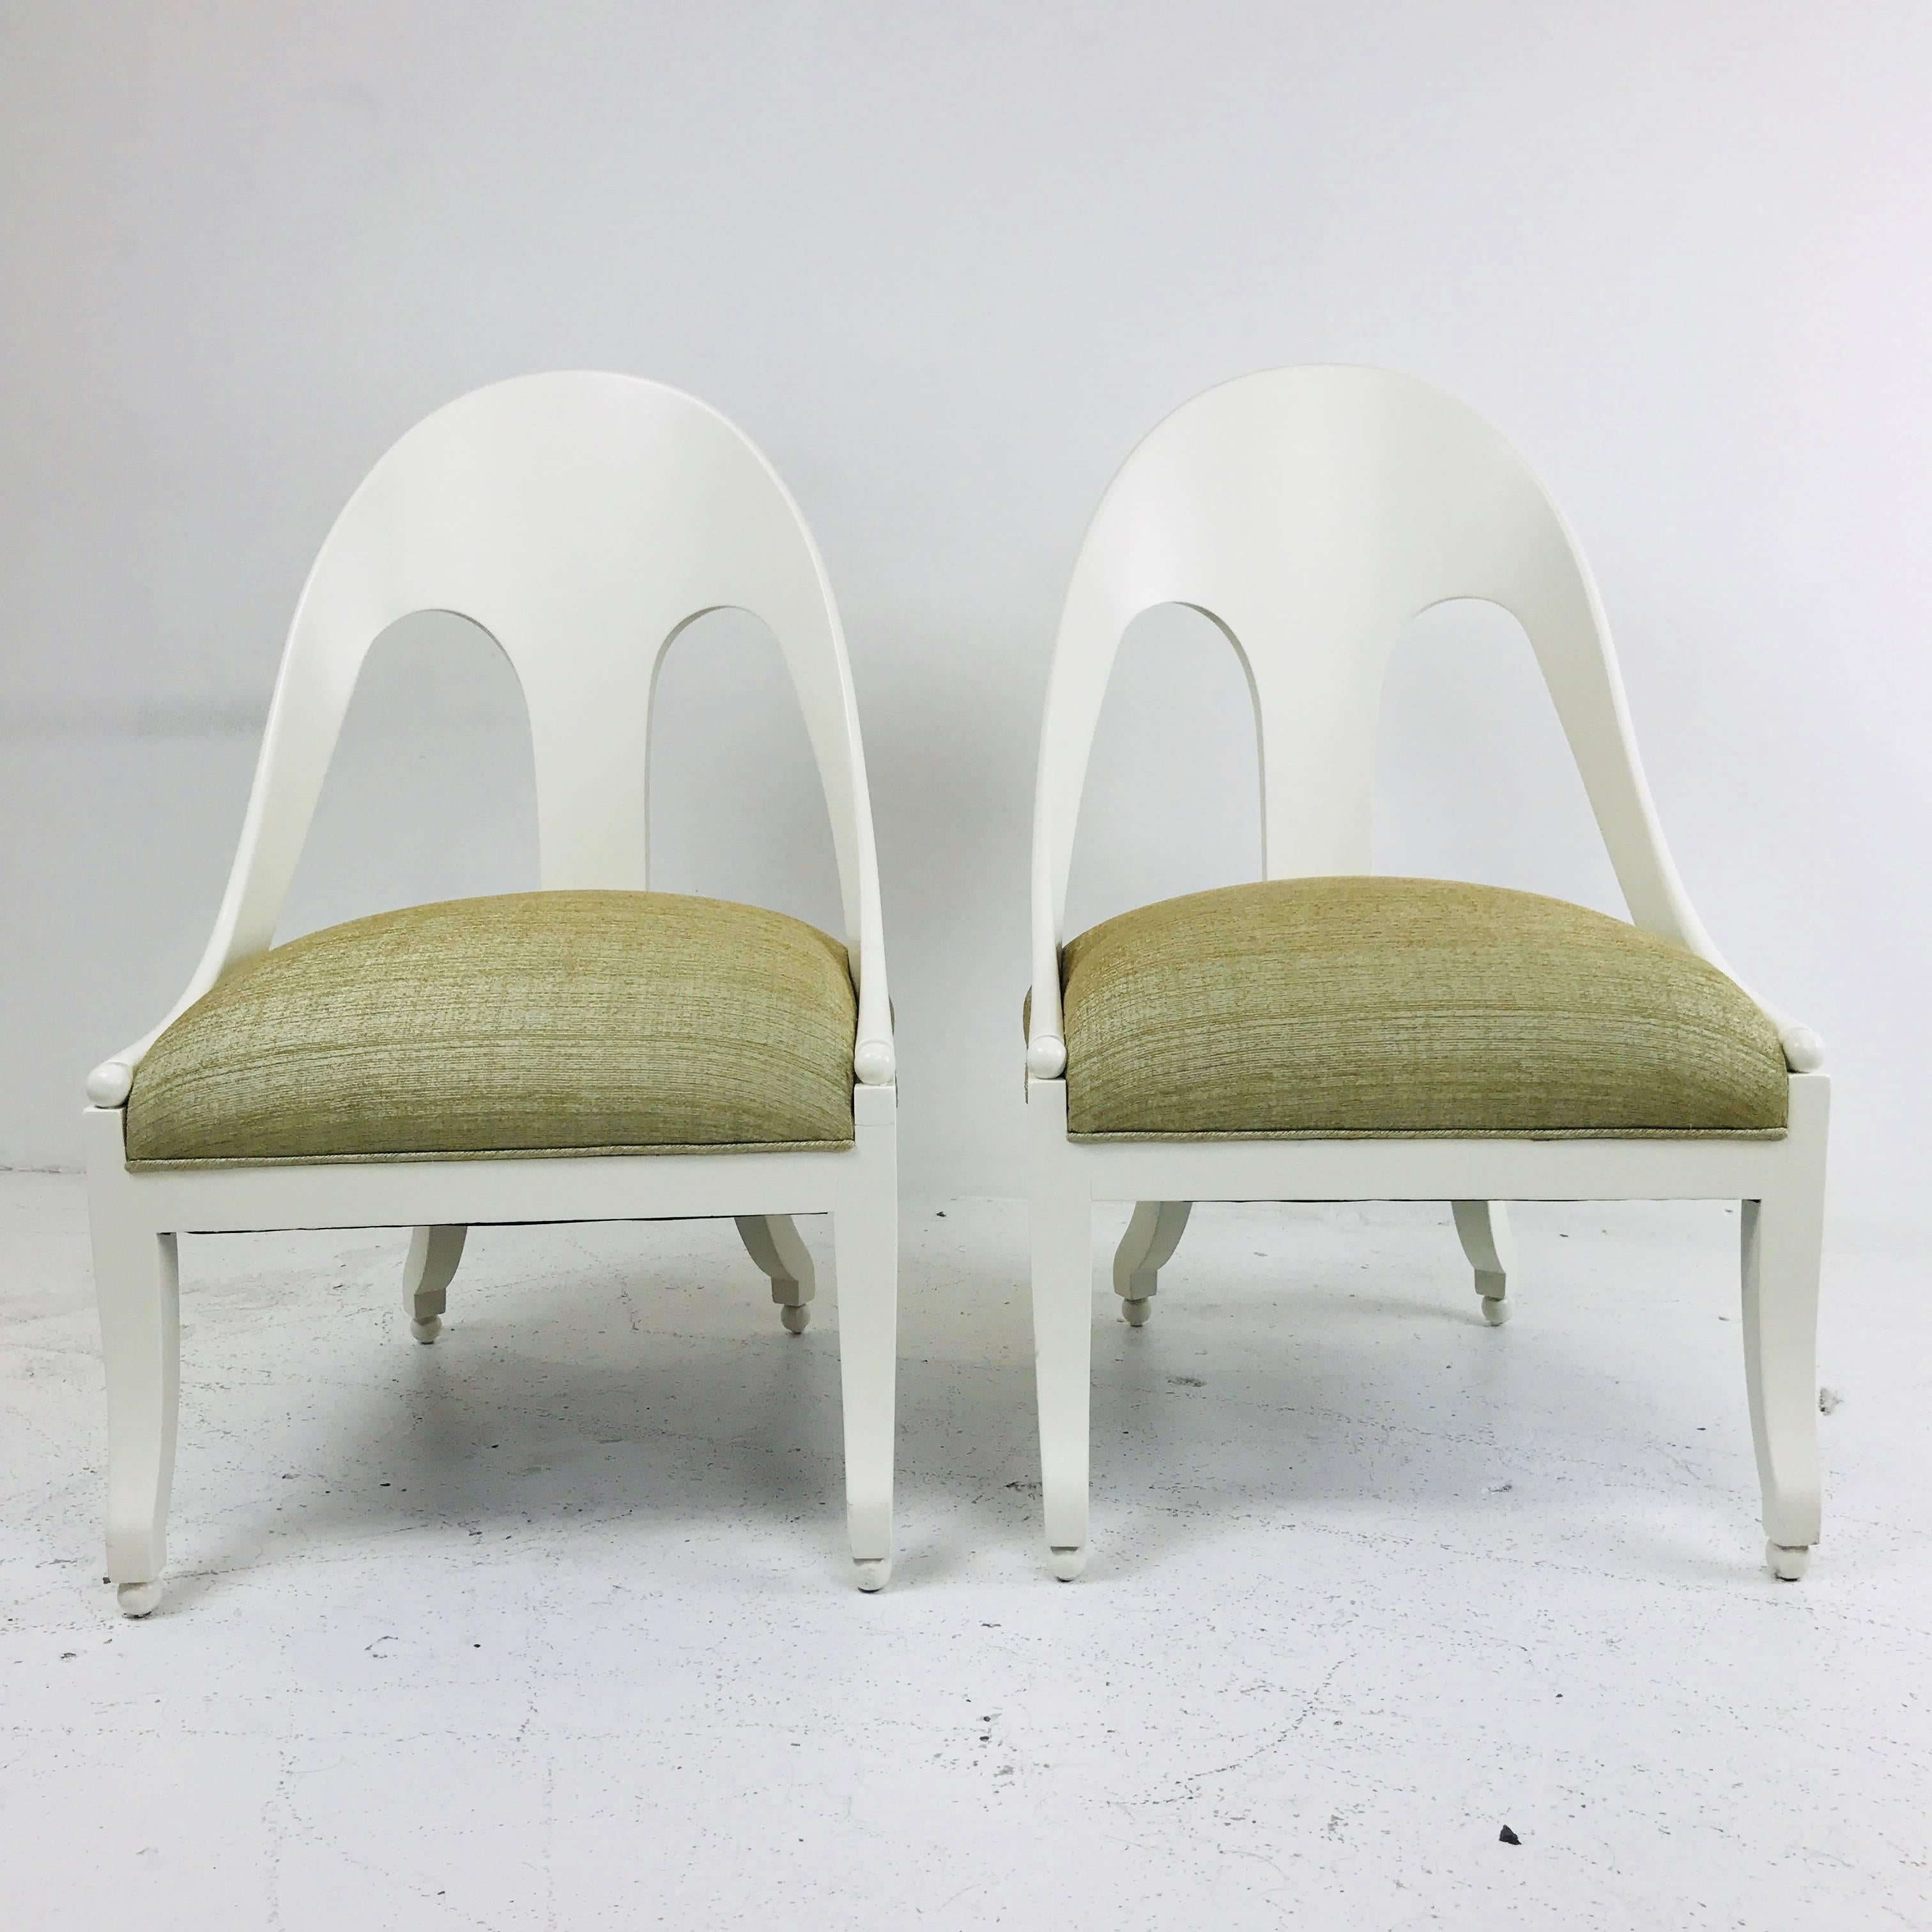 Pair of lacquered spoon back chairs by Baker. Recently  lacquered and upholstered.

Dimensions: 22